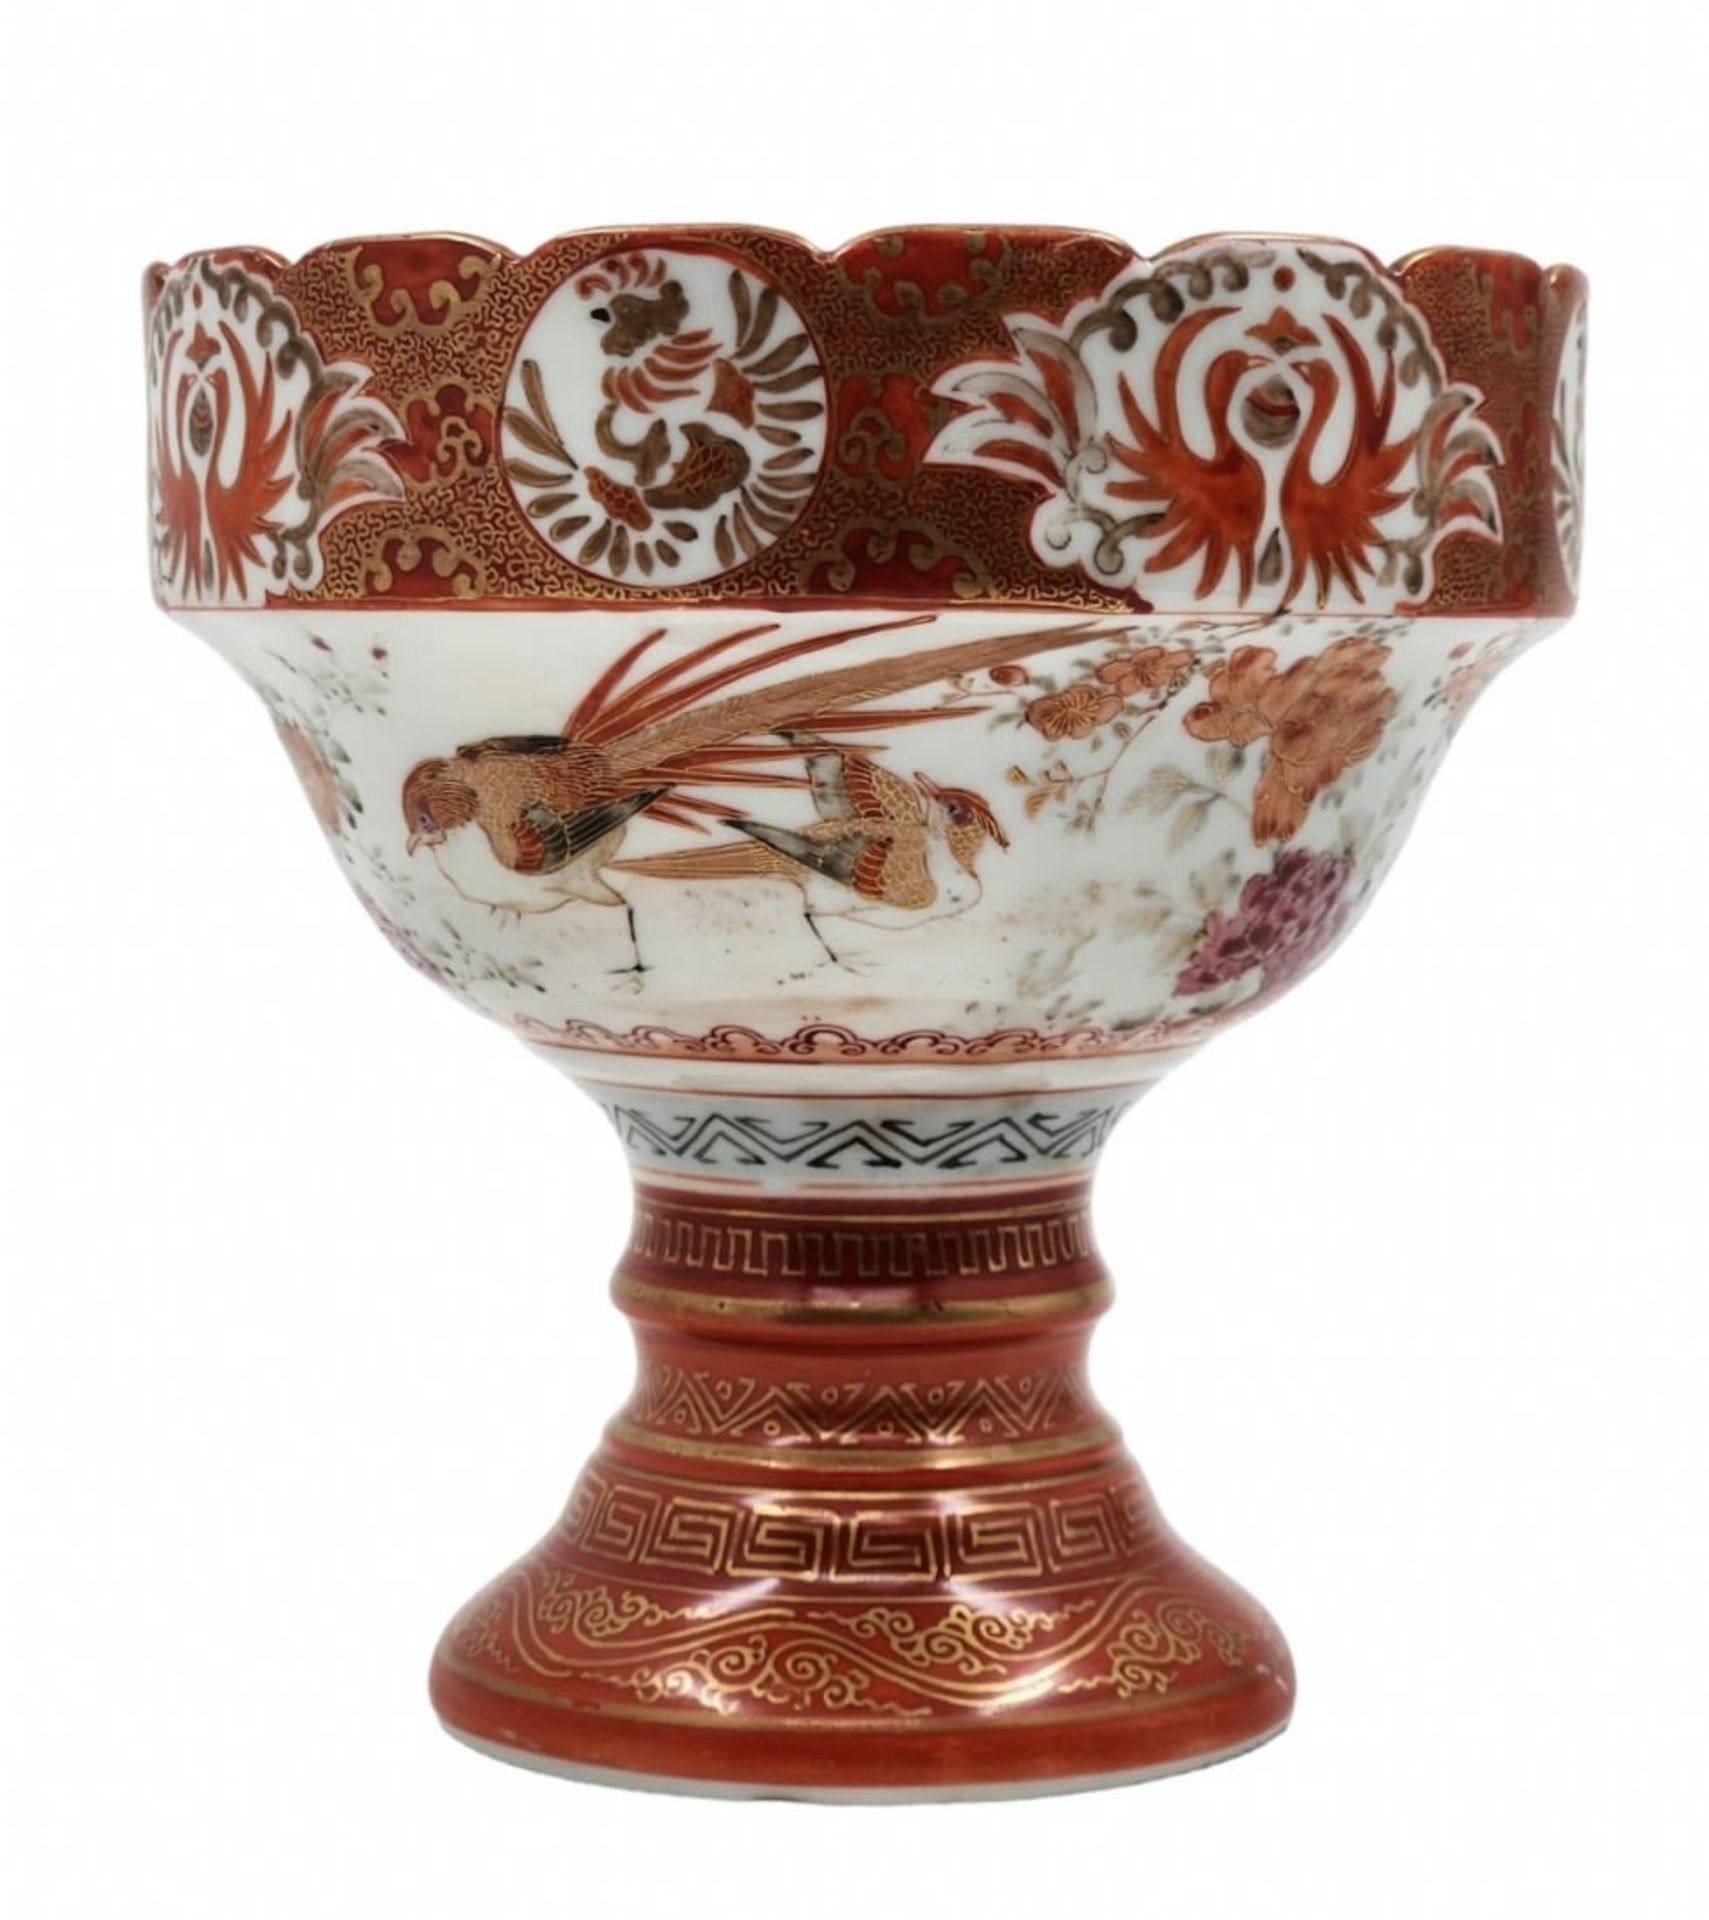 An antique Japanese Kutani vessel, from the last third of the 19th century, decorated with hand